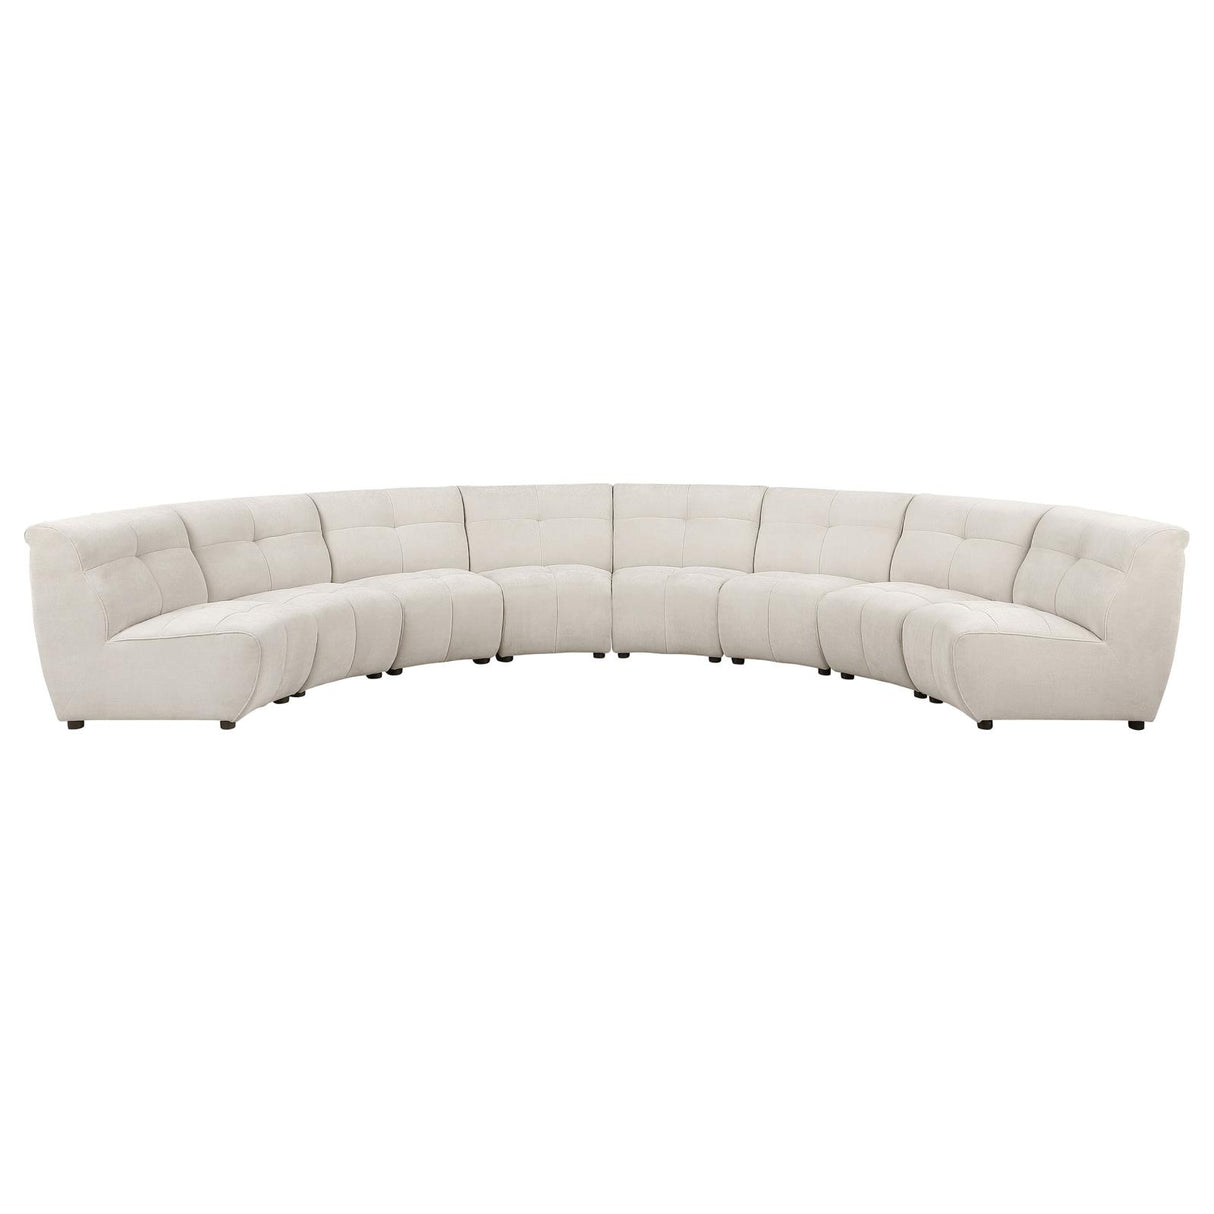 Charlotte 8-piece Upholstered Curved Modular Sectional Sofa Ivory - 551300 - Luna Furniture